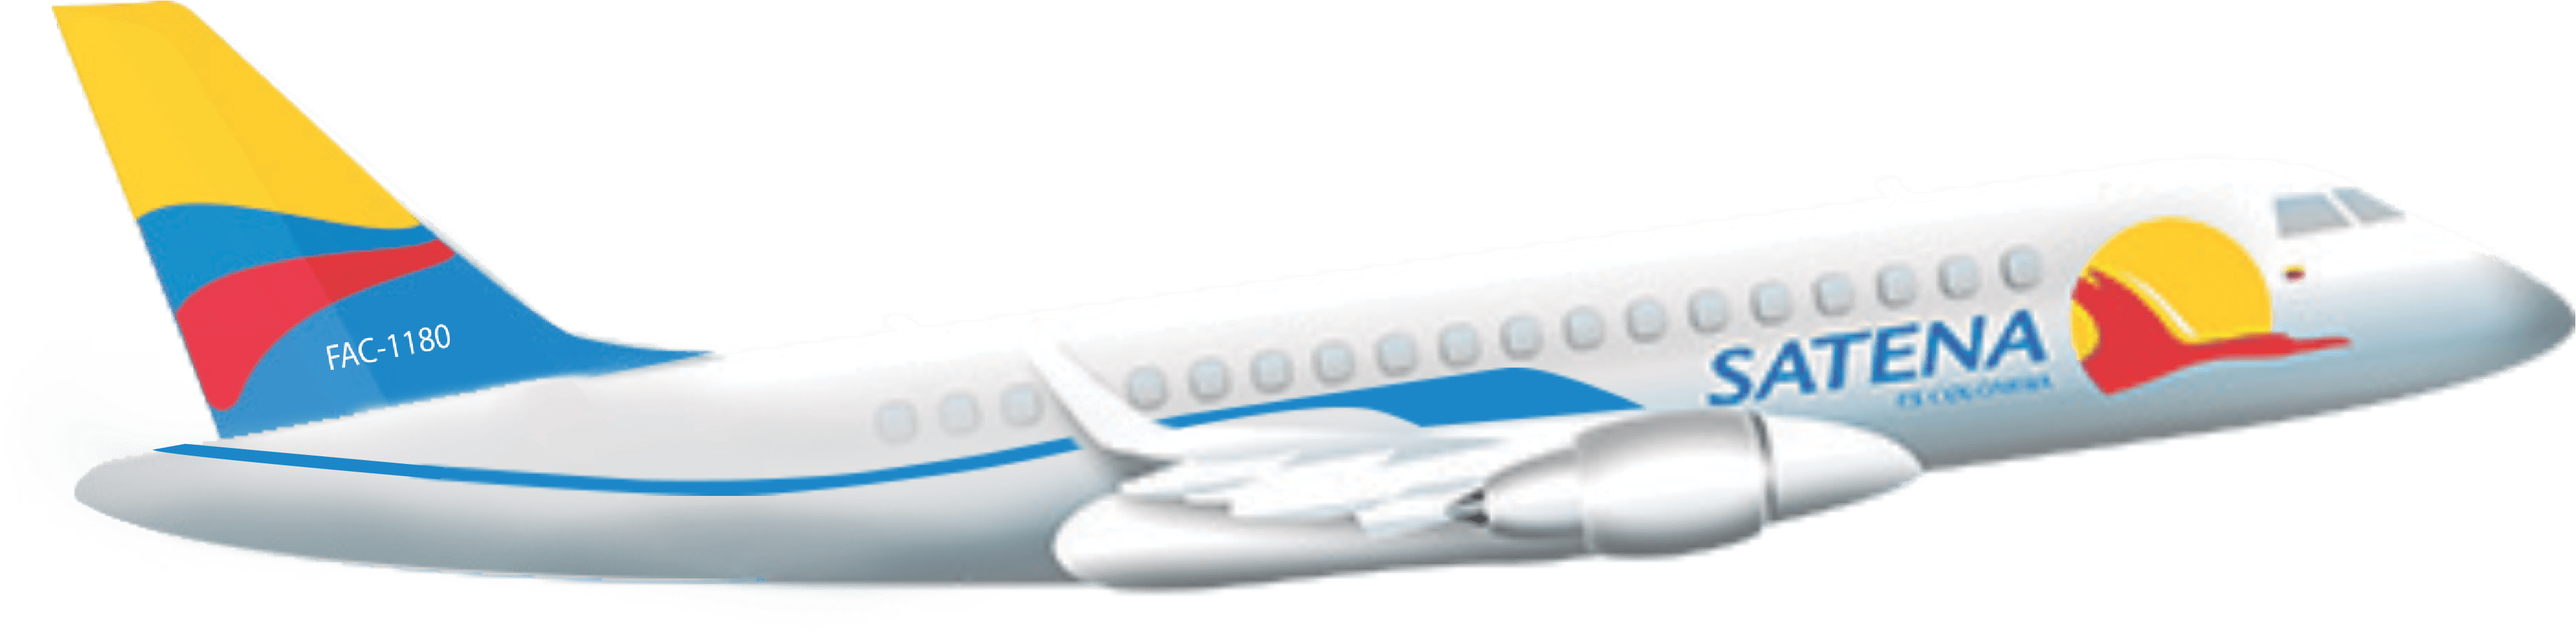 Satena Airlines Aircraft Side View